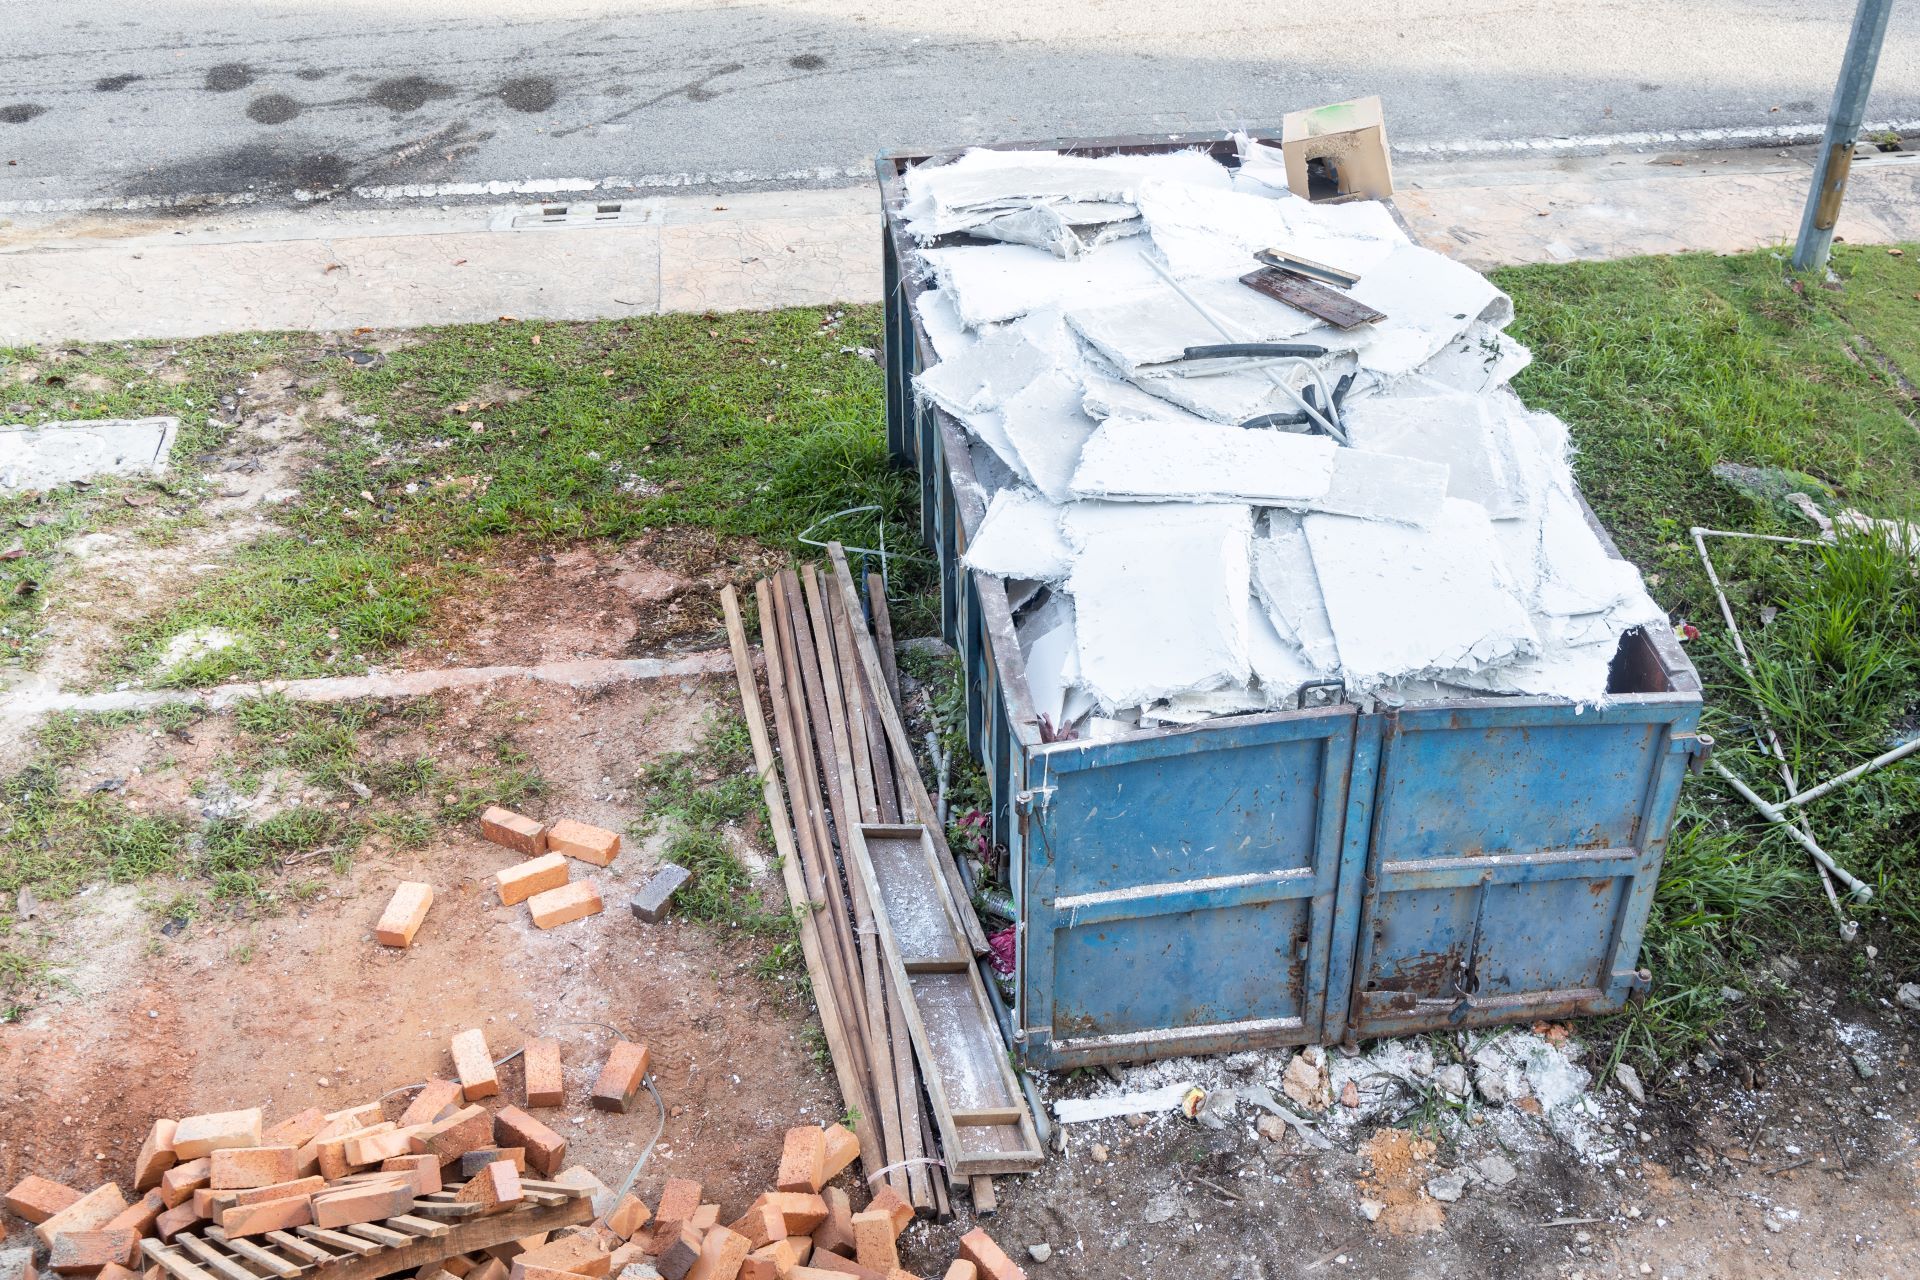 A blue dumpster is sitting in the grass next to a pile of bricks.